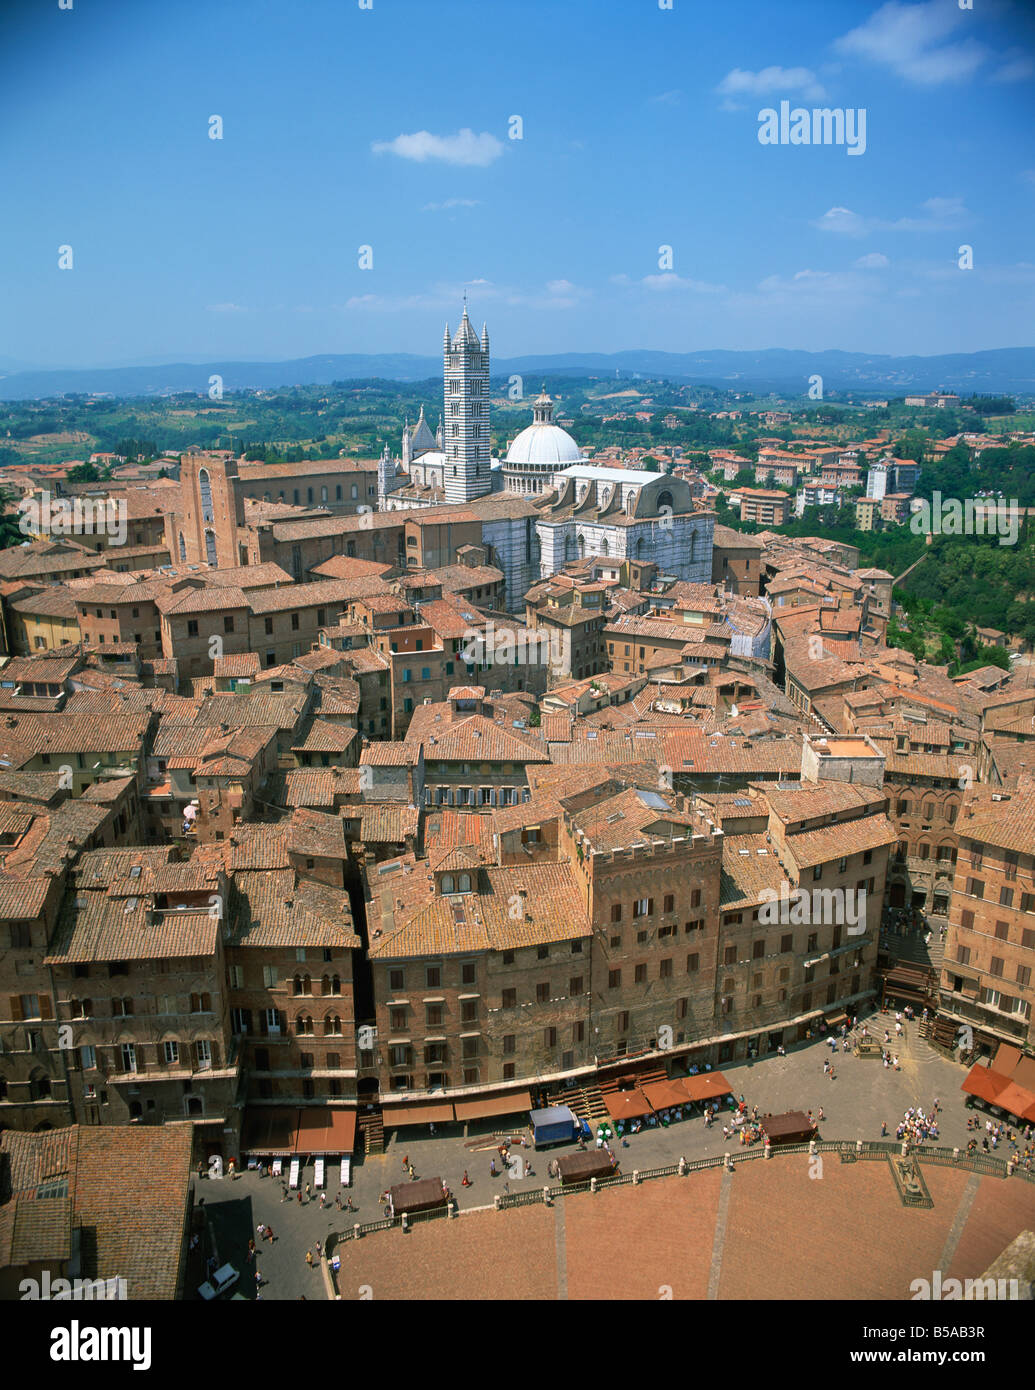 Houses and churches on the skyline of the town of Siena UNESCO World Heritage Site Tuscany Italy Europe Stock Photo